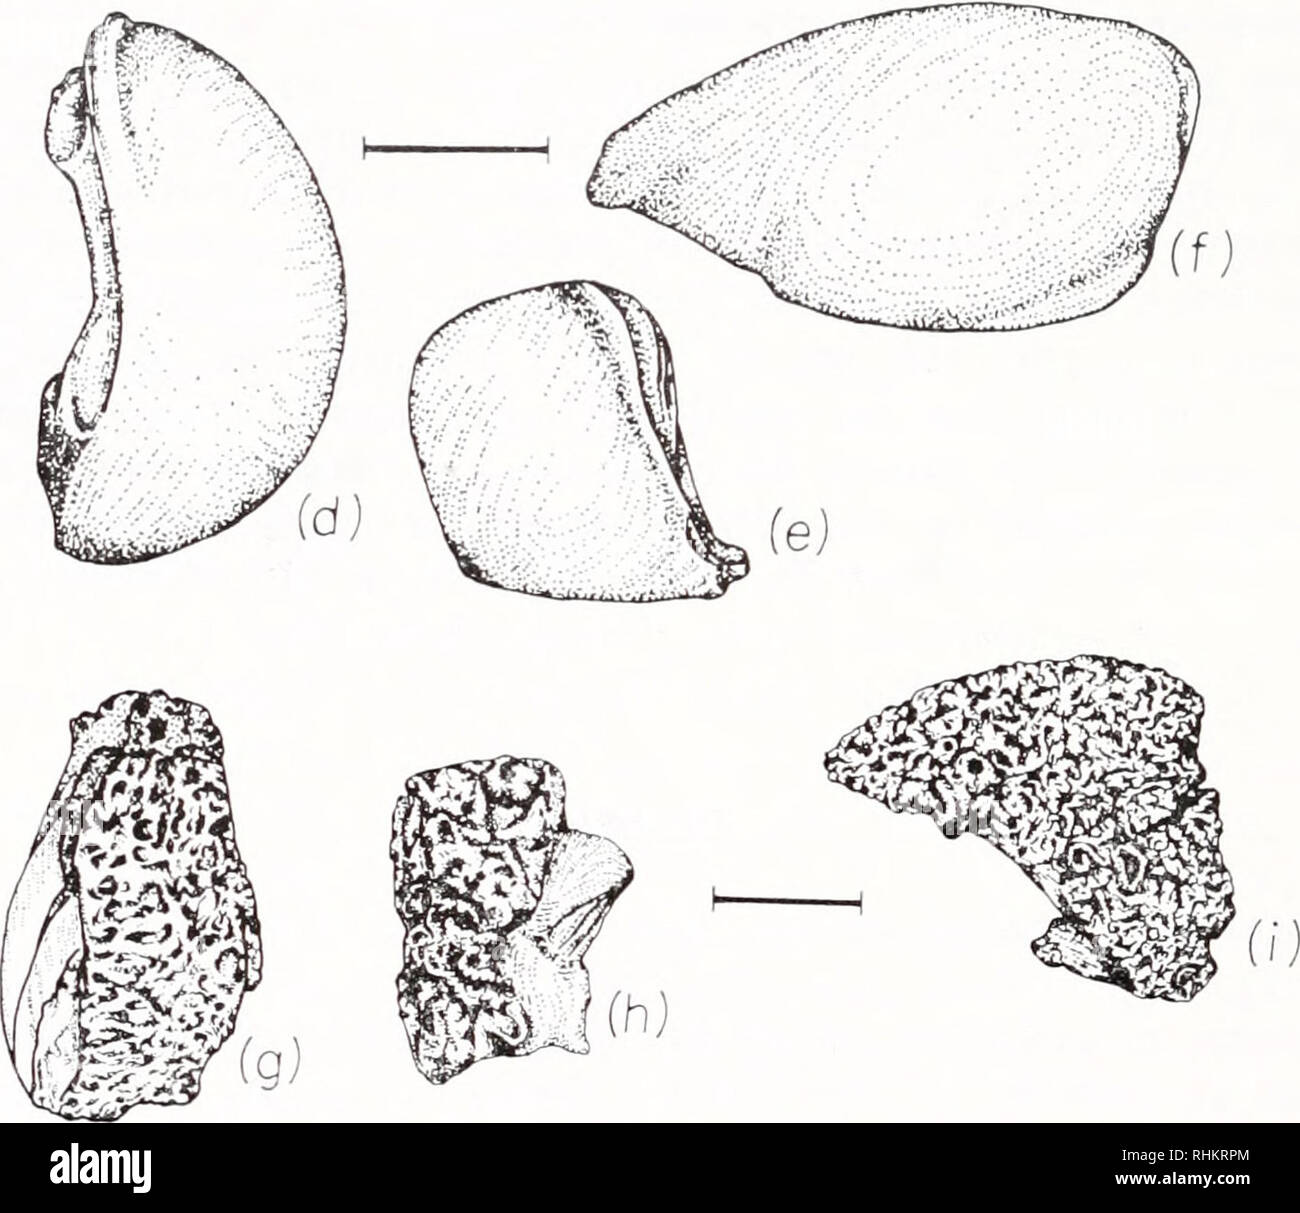 . The Biological bulletin. Biology; Zoology; Biology; Marine Biology. FIGURE 1. Shape of the lefthand branchial chamber, according to the paraffin casts obtained from different species. Cardisoma guaiihuini Latreille : a) dorsal view; b) frontal view; c) lateral view. Gecardinus lateralis (Freminville) : d) dorsal view; e) frontal view; f) lateral view. Ocypode quadrata (Fabricius) : g) dorsal view; h) frontal view; i) lateral view. Casts for drawings were selected among those obtained from the largest specimens collected. Scale bars represent 1 cm. pyramidal chamber (Fig. 1. g to i) with very Stock Photo